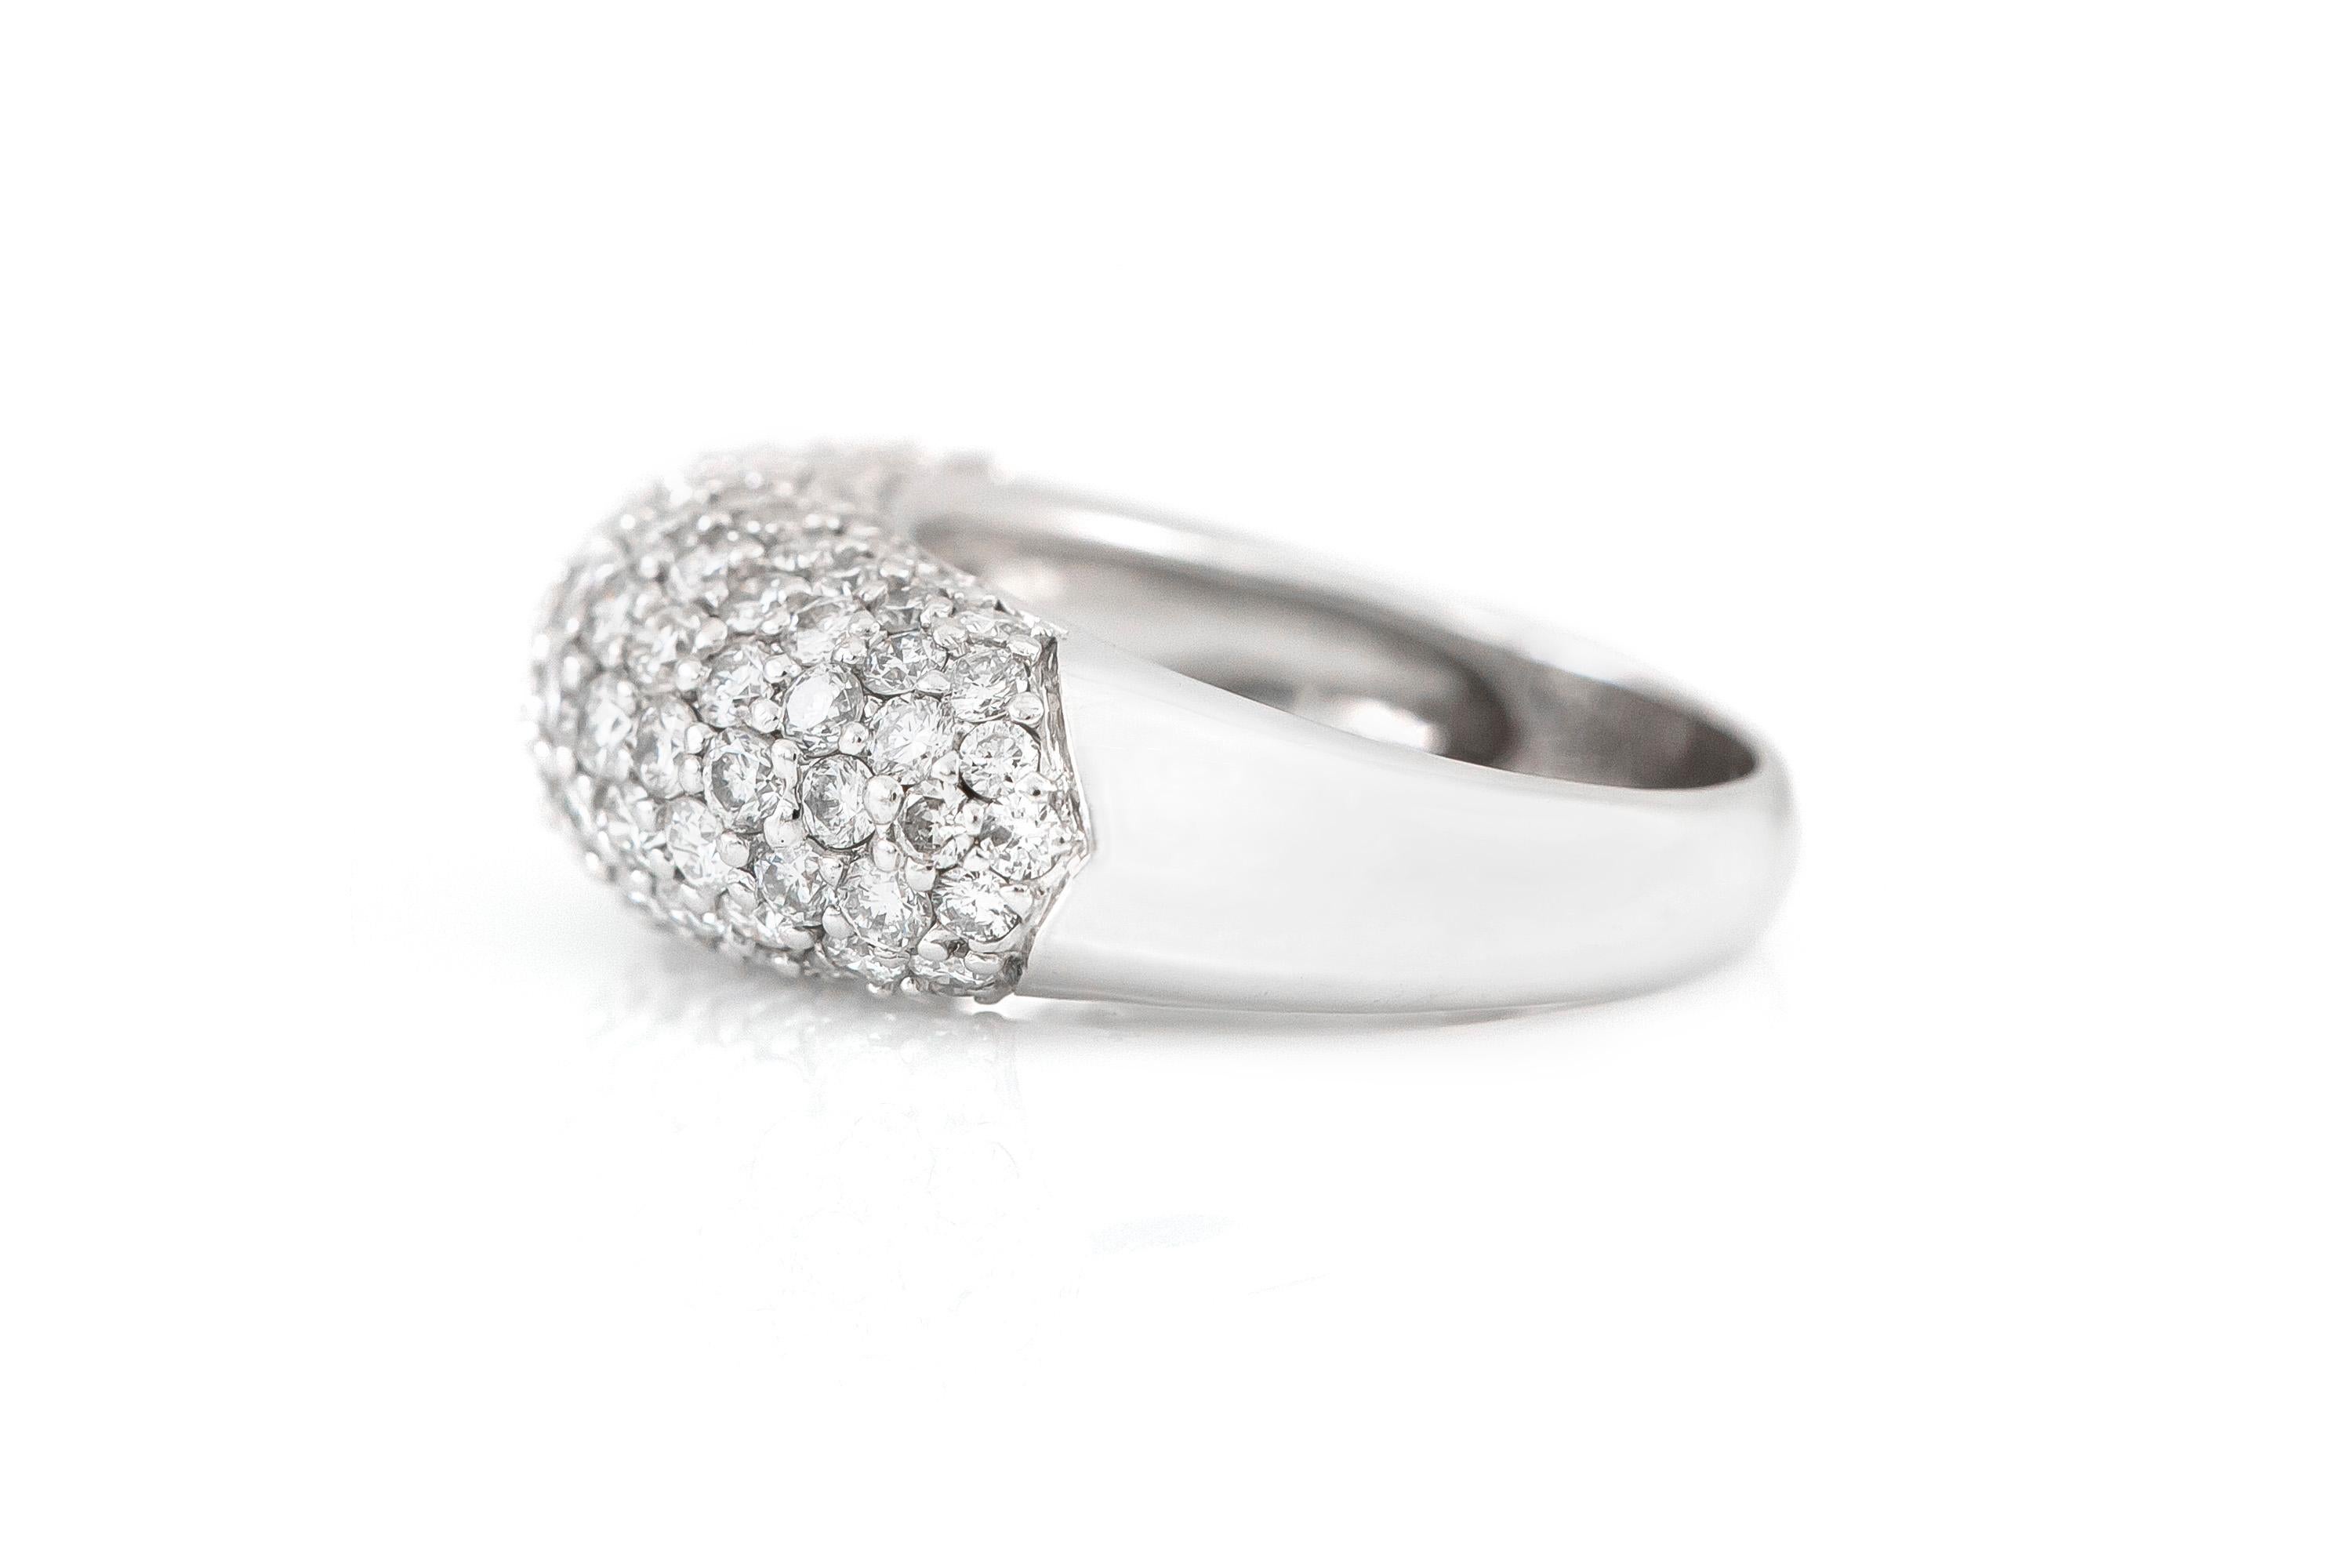 The ring is finely crafted in 18k white gold with diamonds weighing approximately total of 3.46 carat.
Circa 2000.